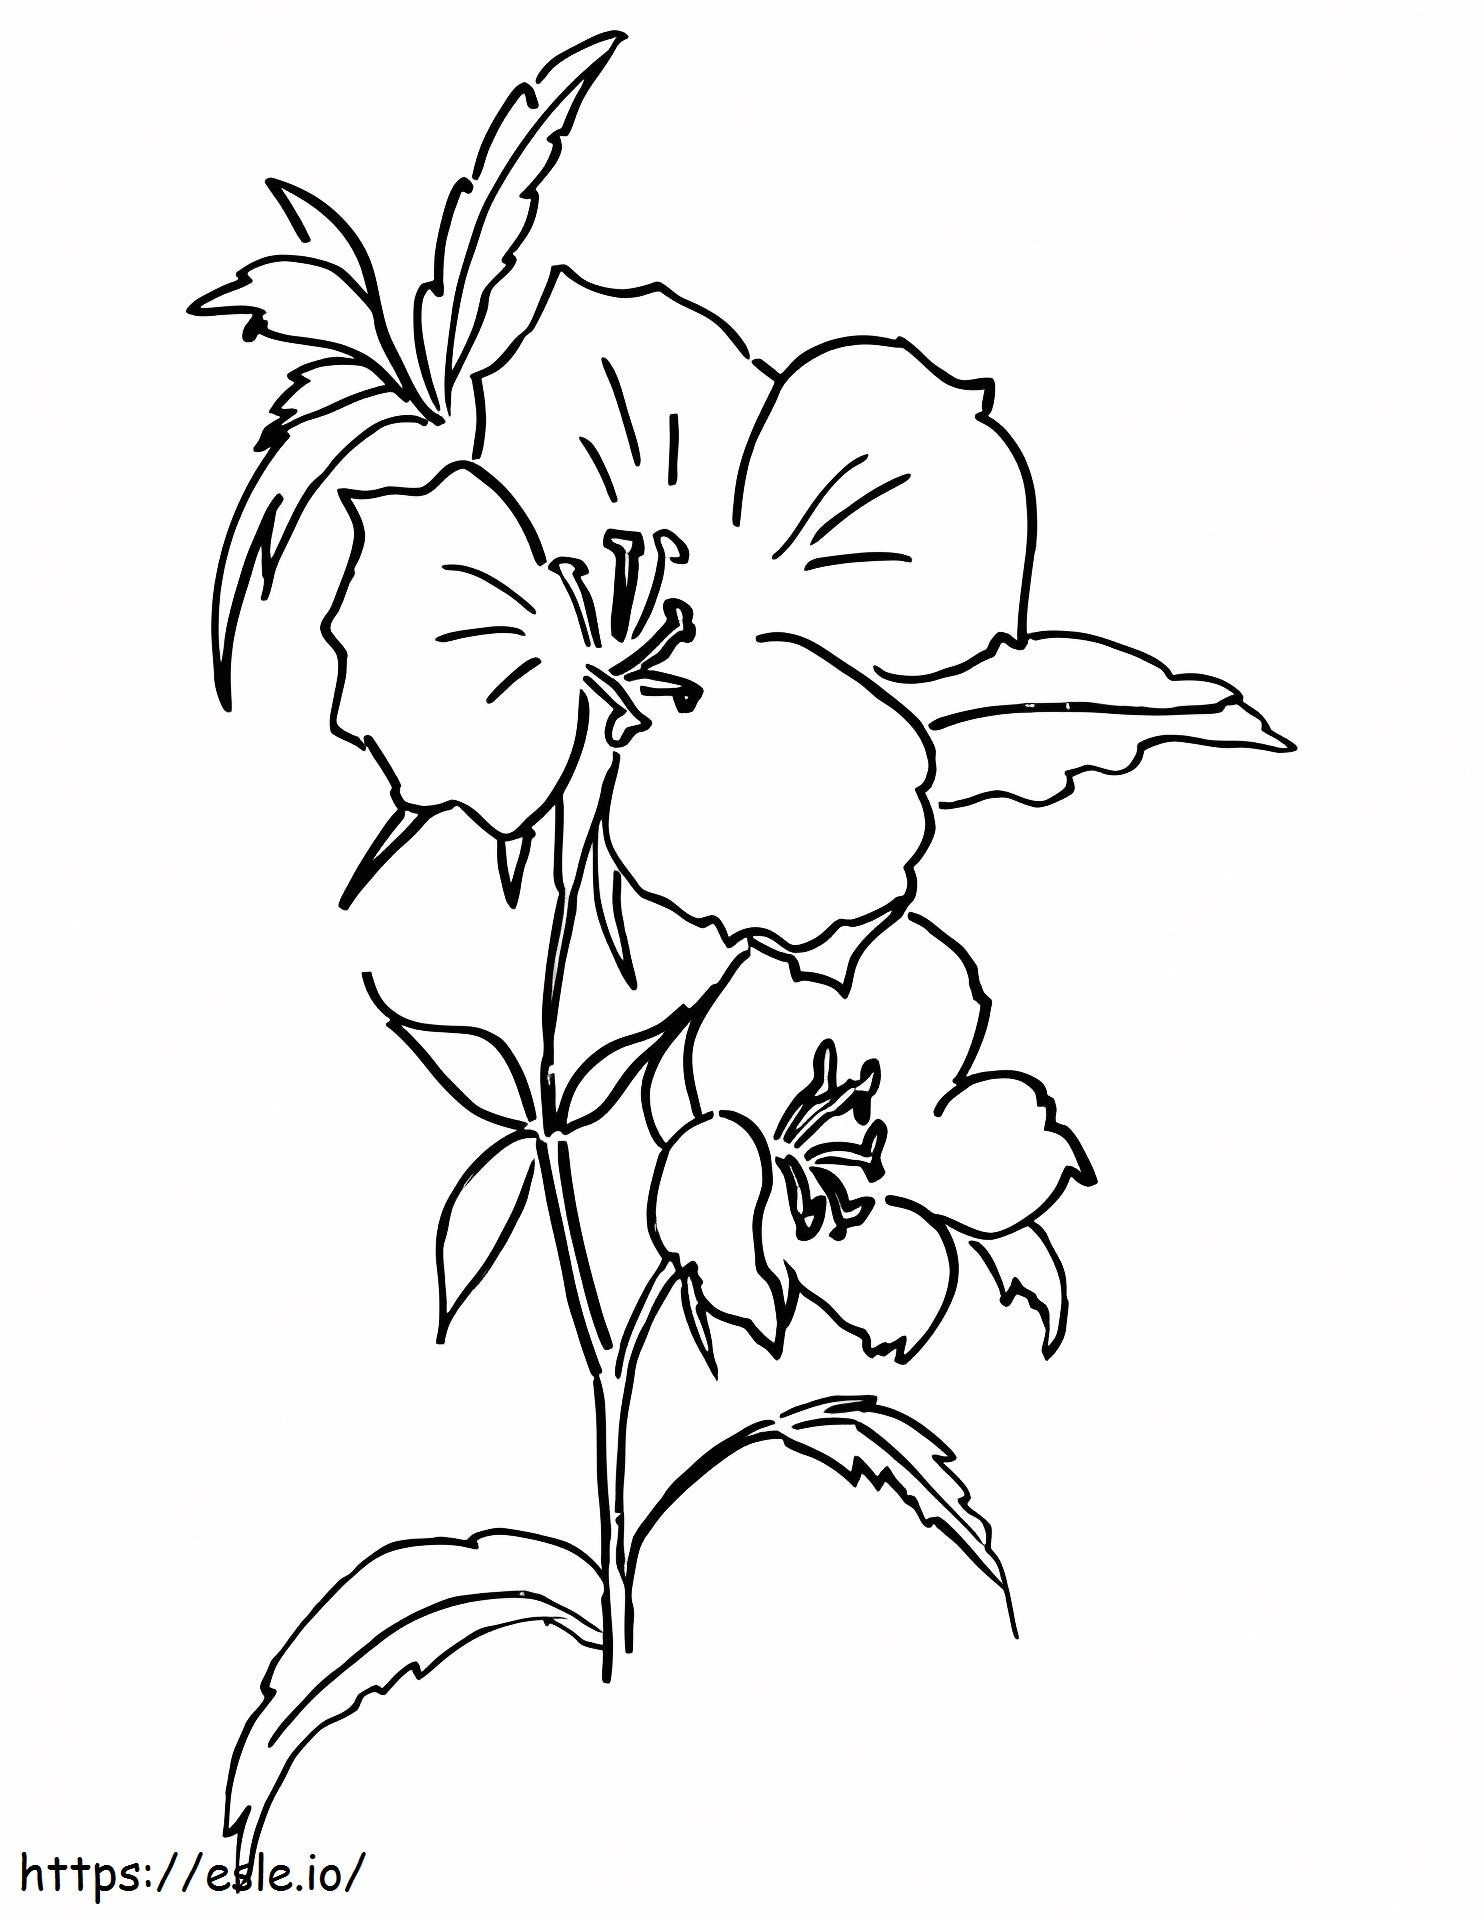 Farewell To Spring Or Godetia coloring page